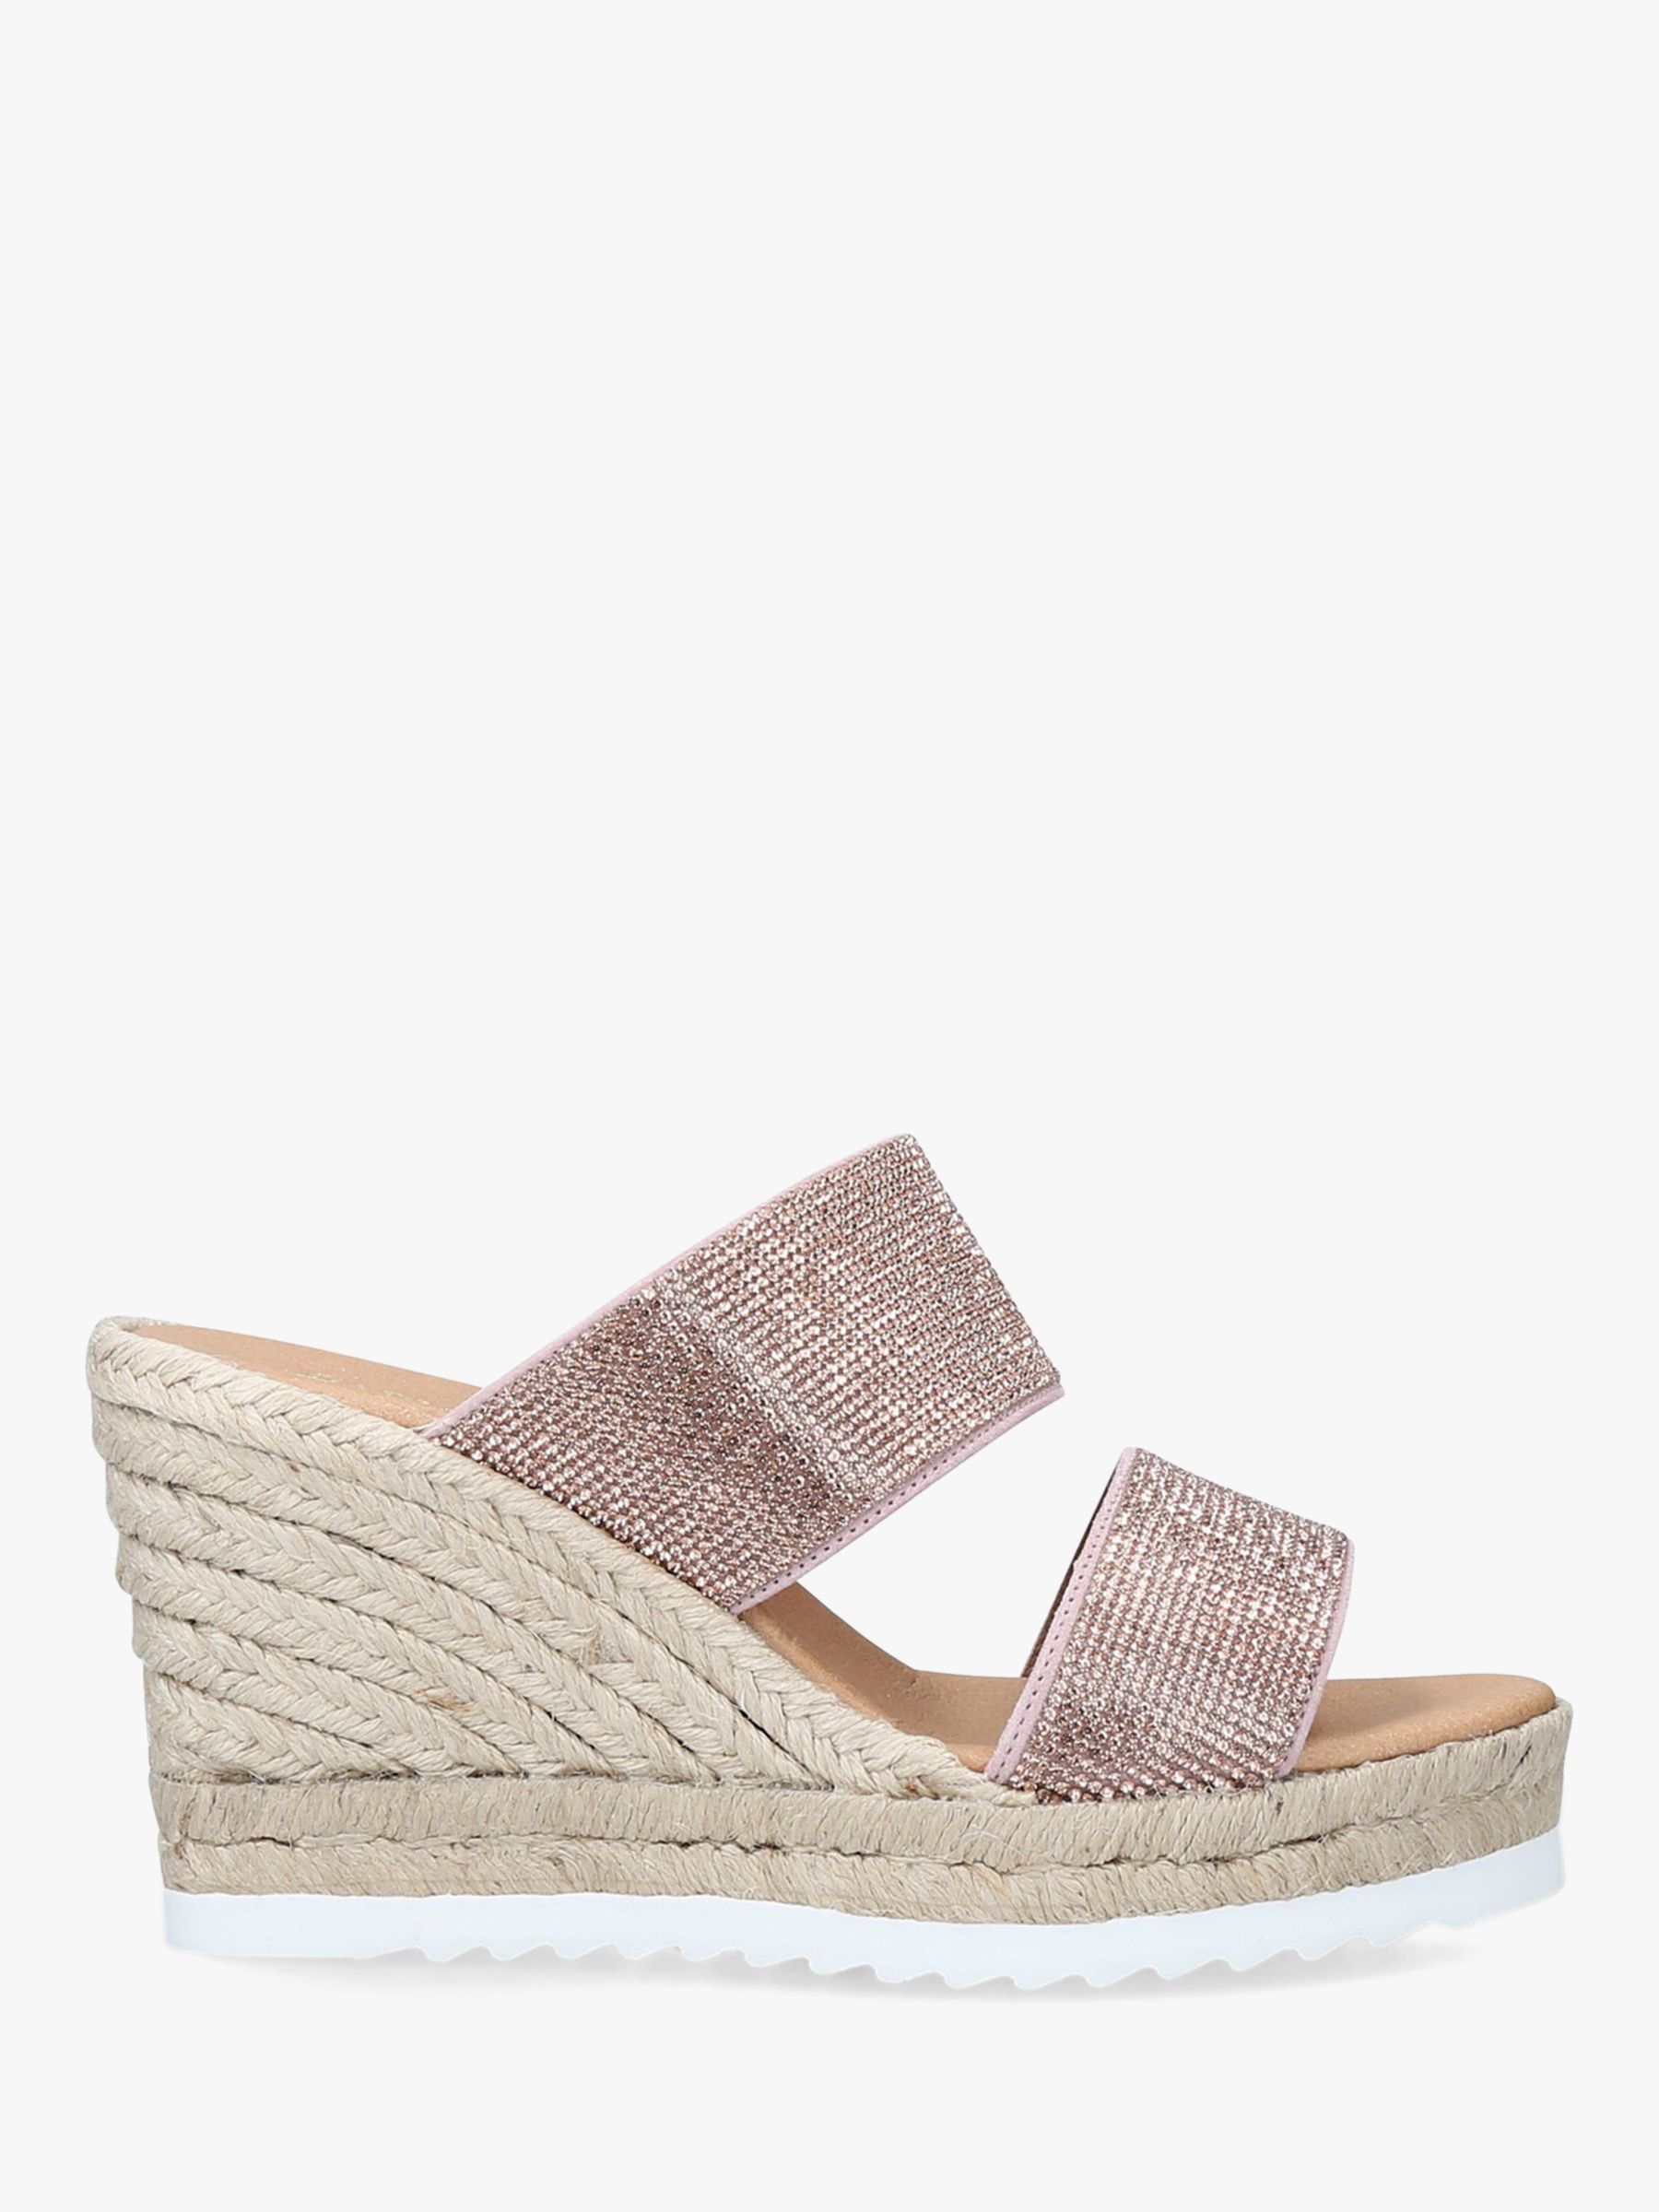 Carvela Klear Woven Wedge Suede Sandals, Nude